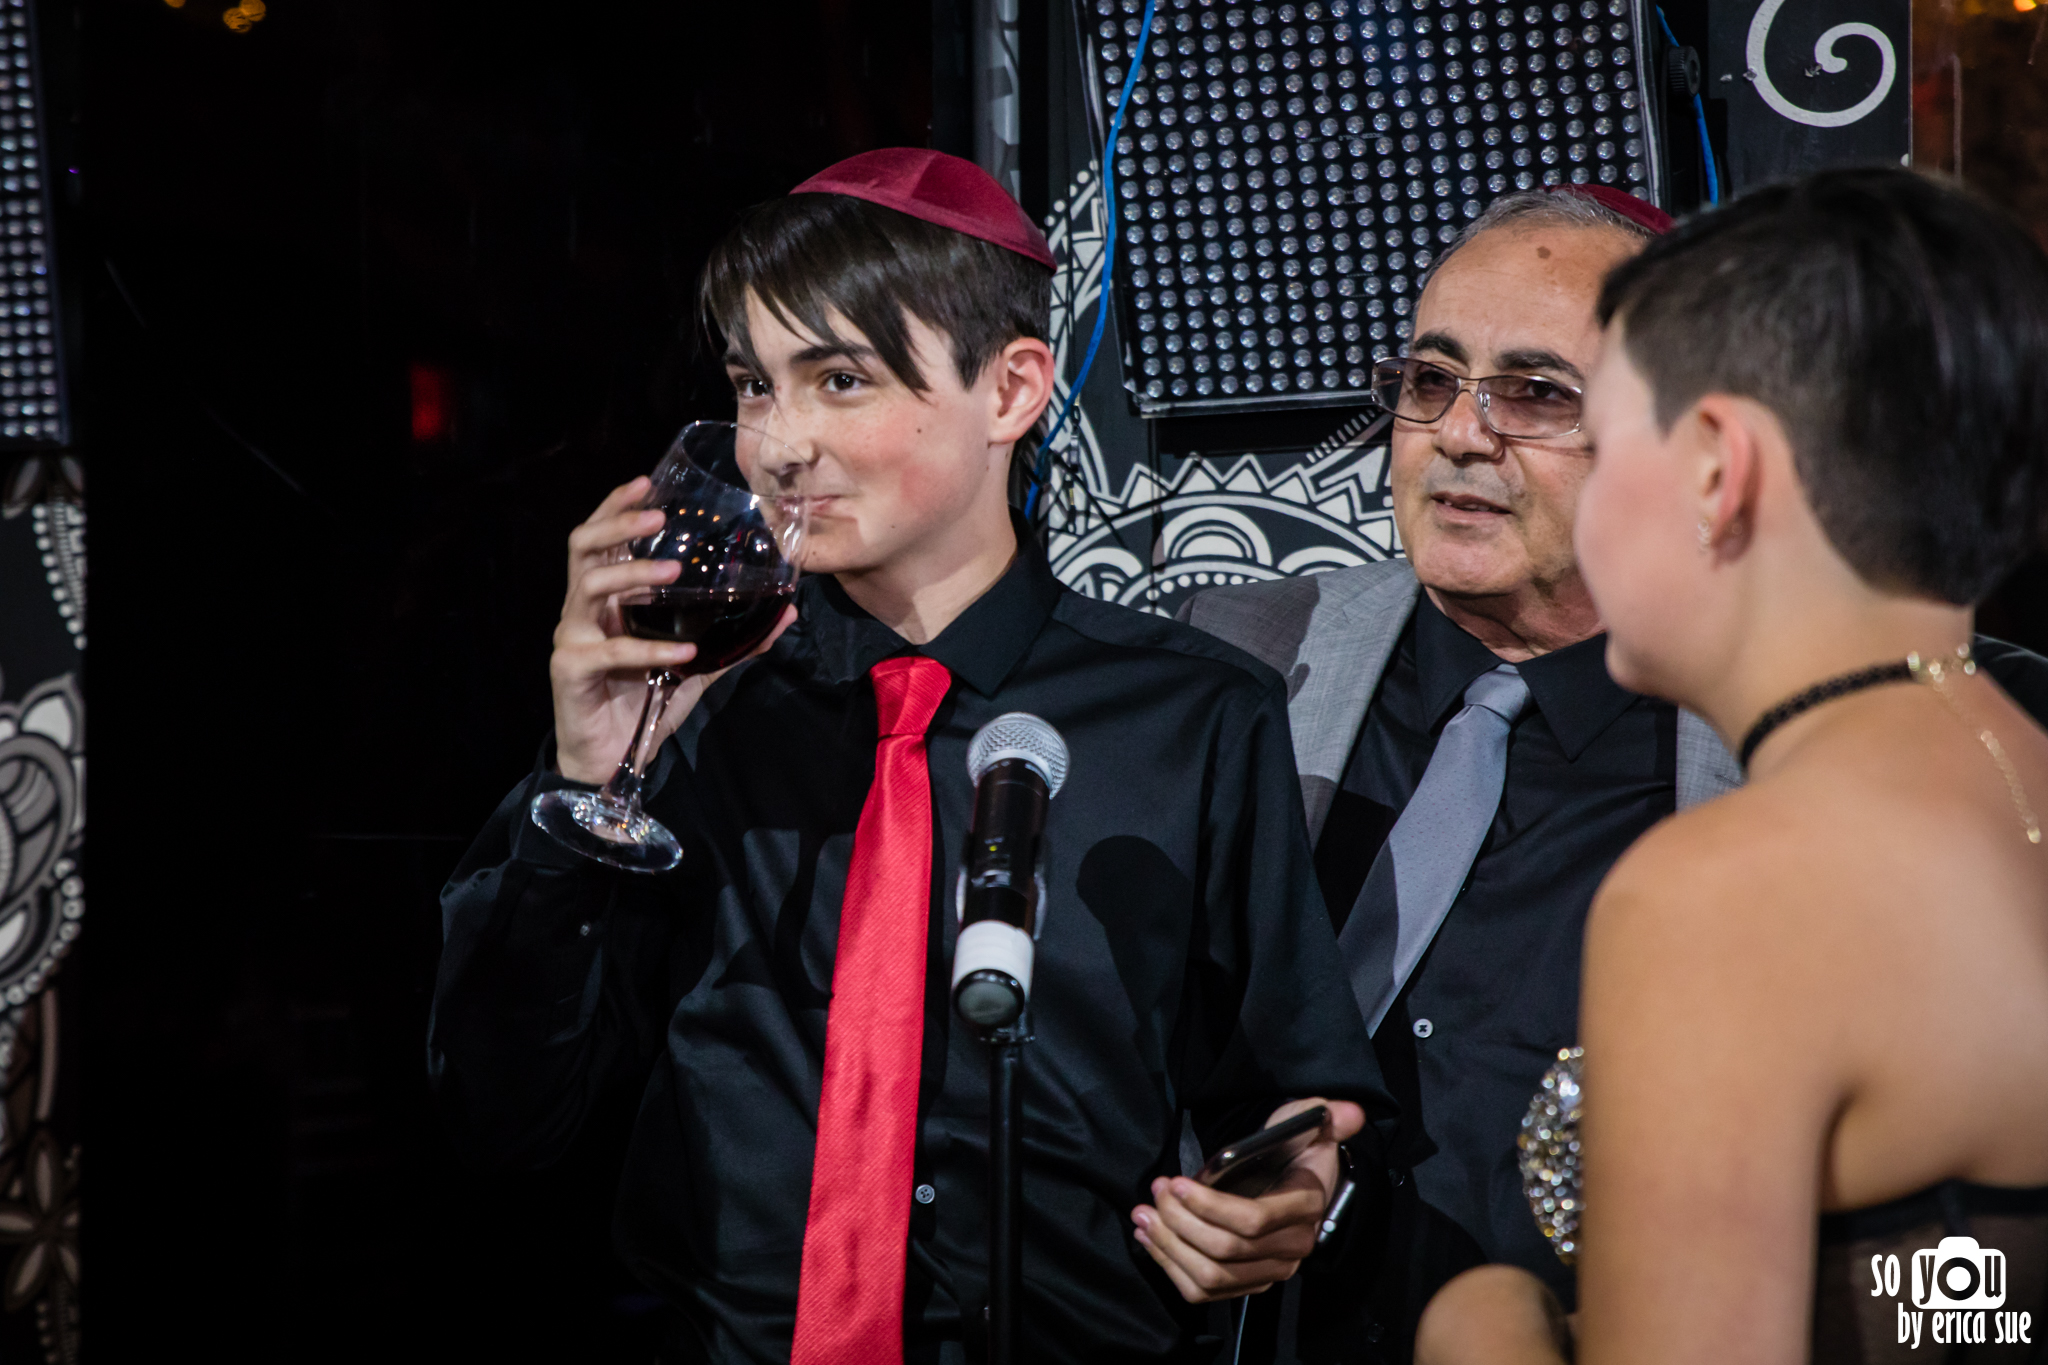 bat-mitzvah-photography-so-you-by-erica-sue-venue-ft-lauderdale-9678.jpg